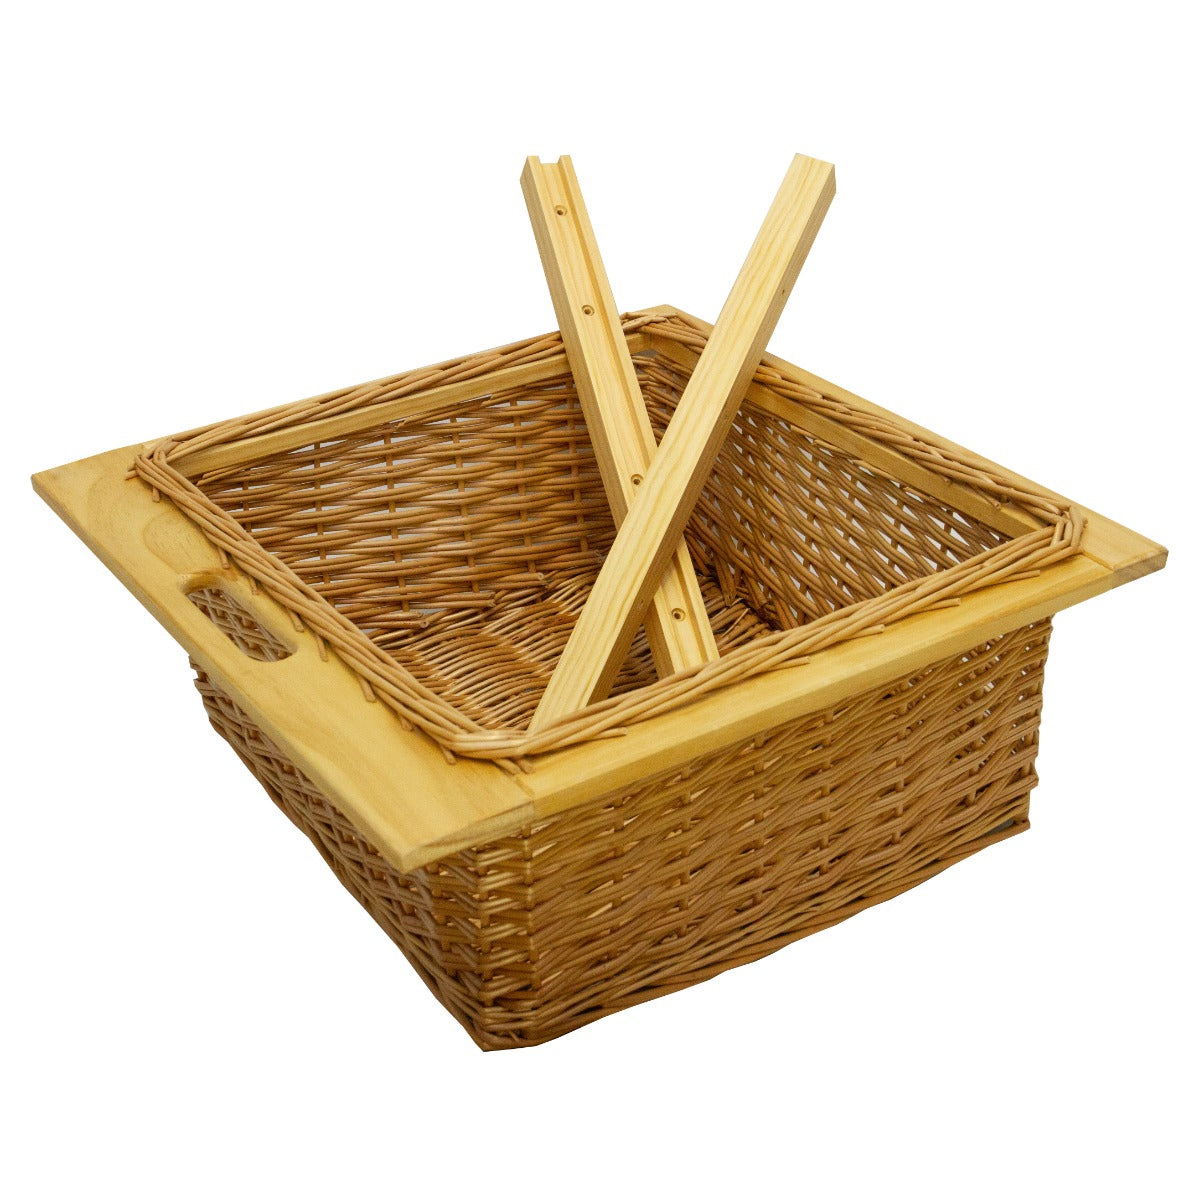 Pull Out Wicker Kitchen Baskets 600mm